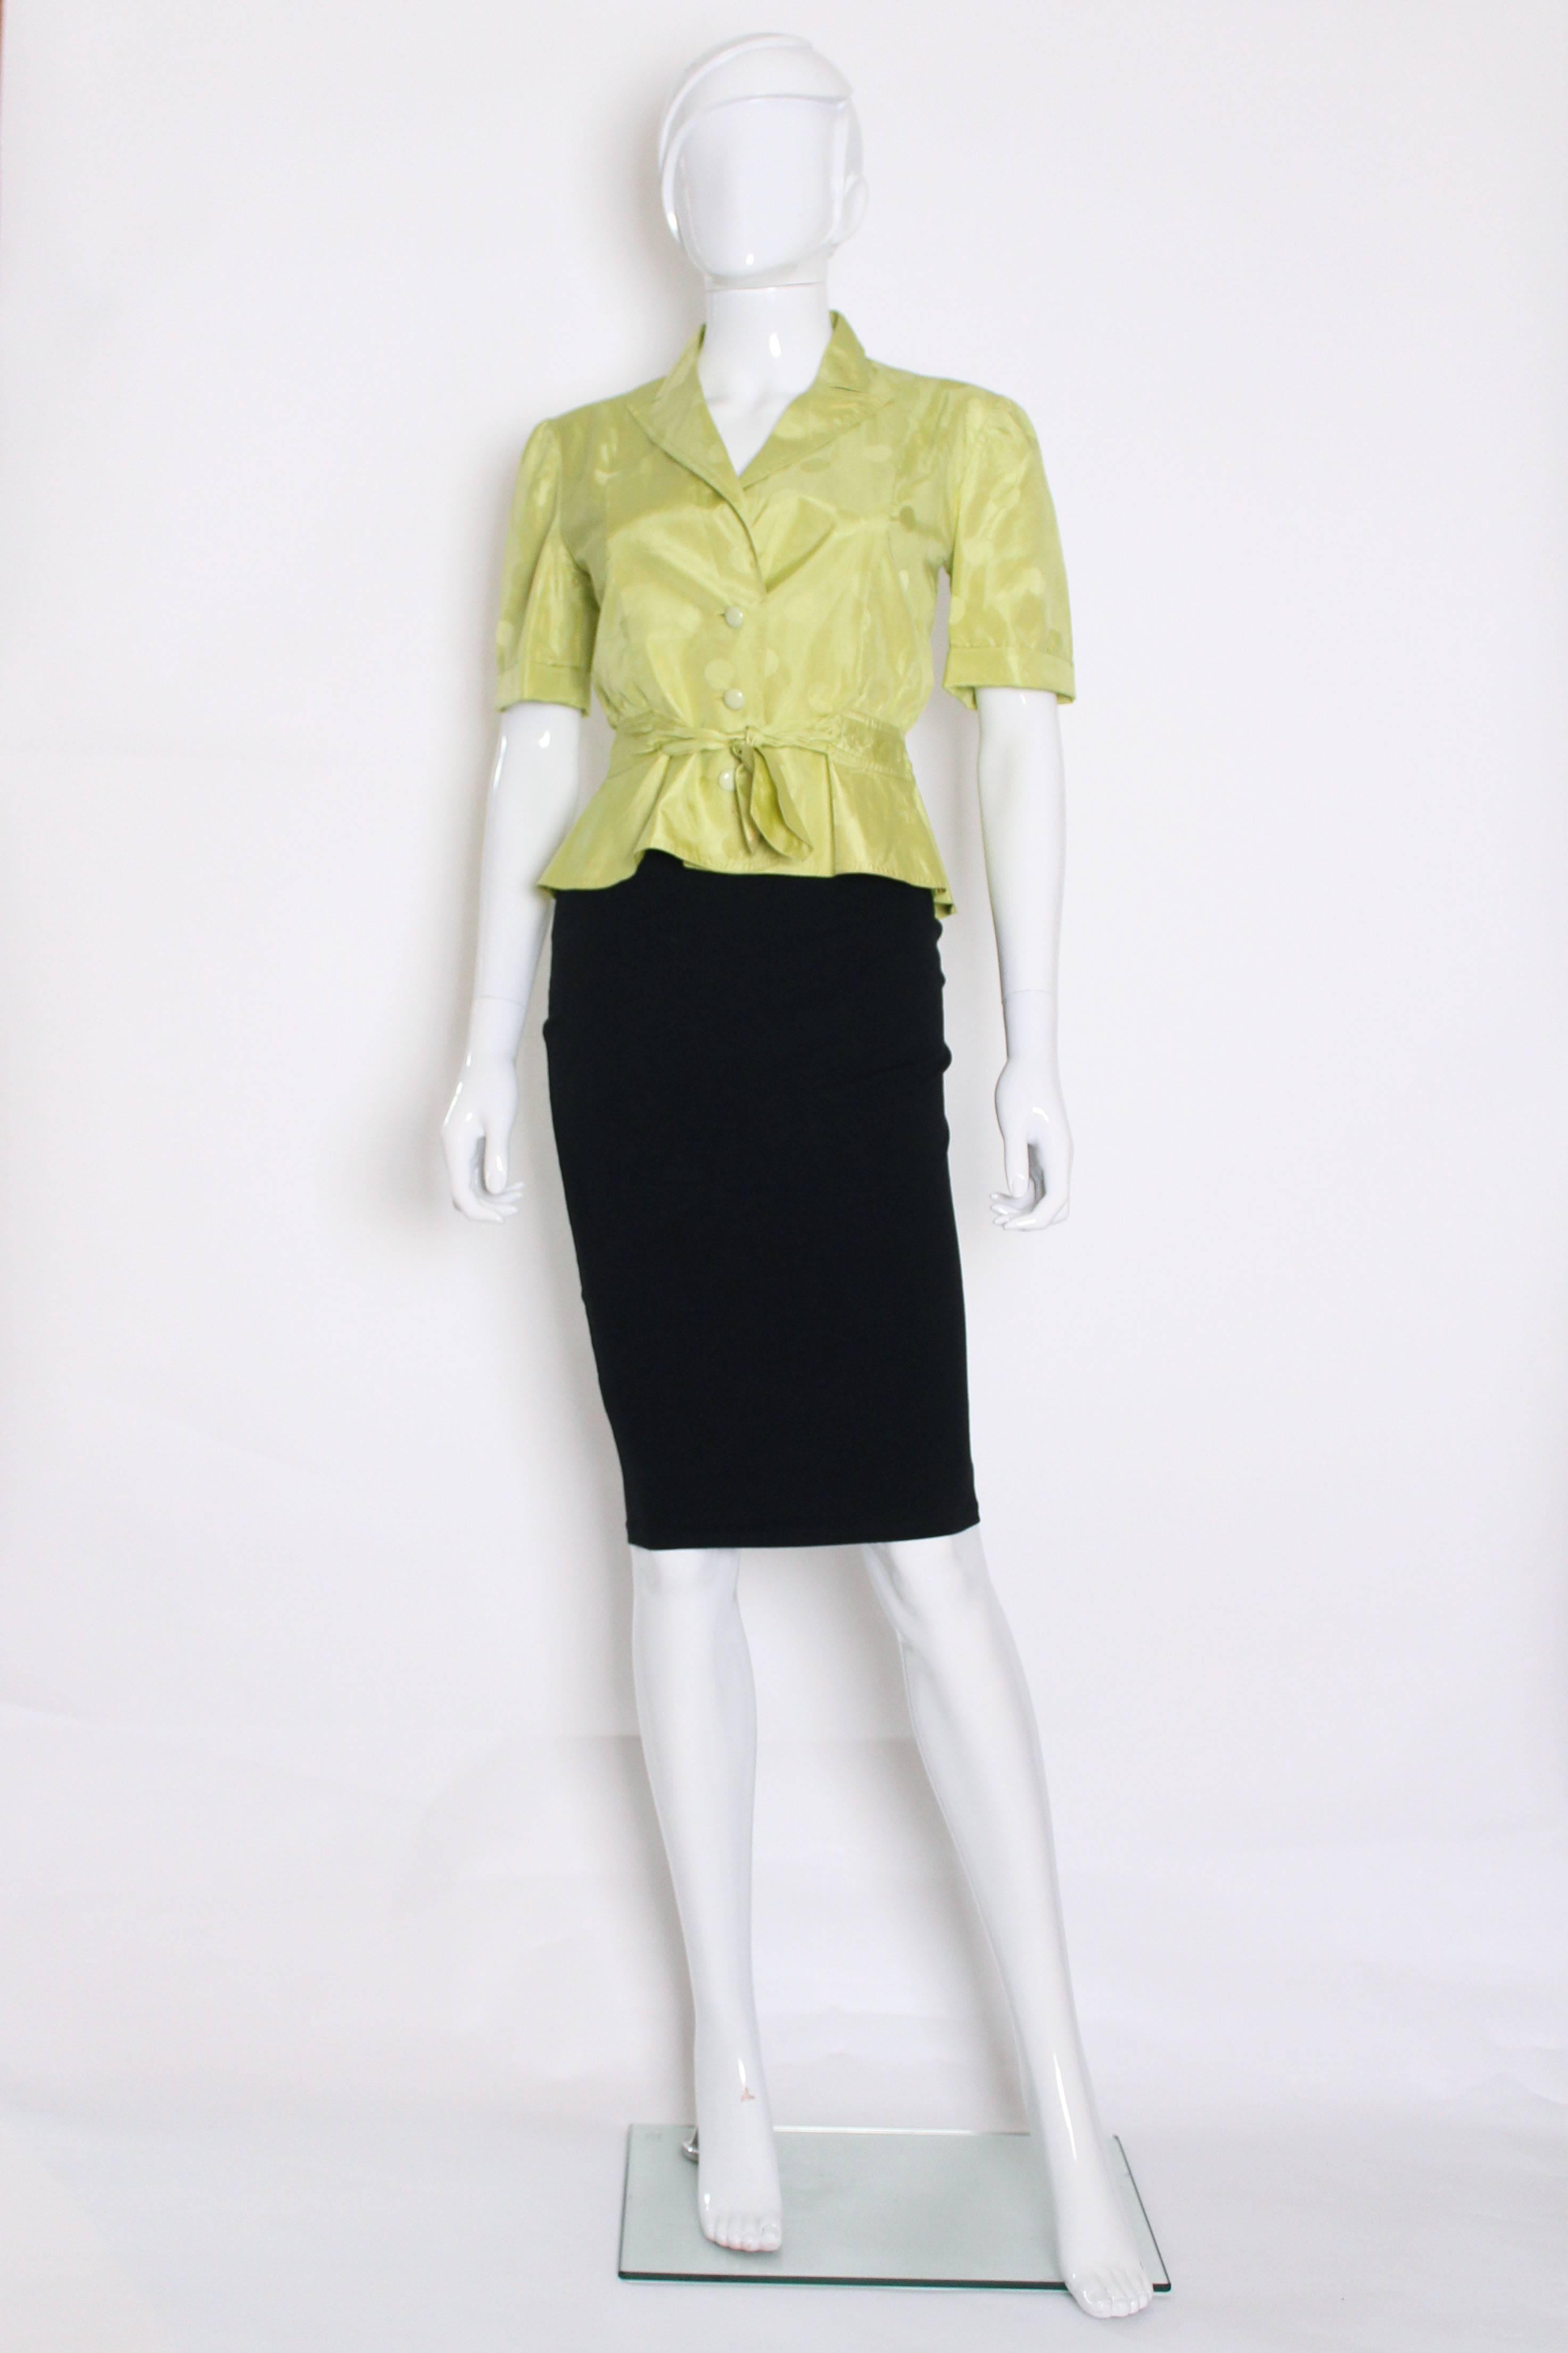 A chic chartreuse colour jacket by Italian fashion house Valentino.
This jacket has spot detail on the fabric. The jacket has short sleeves with turn up cuffs, a breast pocket on the right hand side , three button opening , an attached belt and